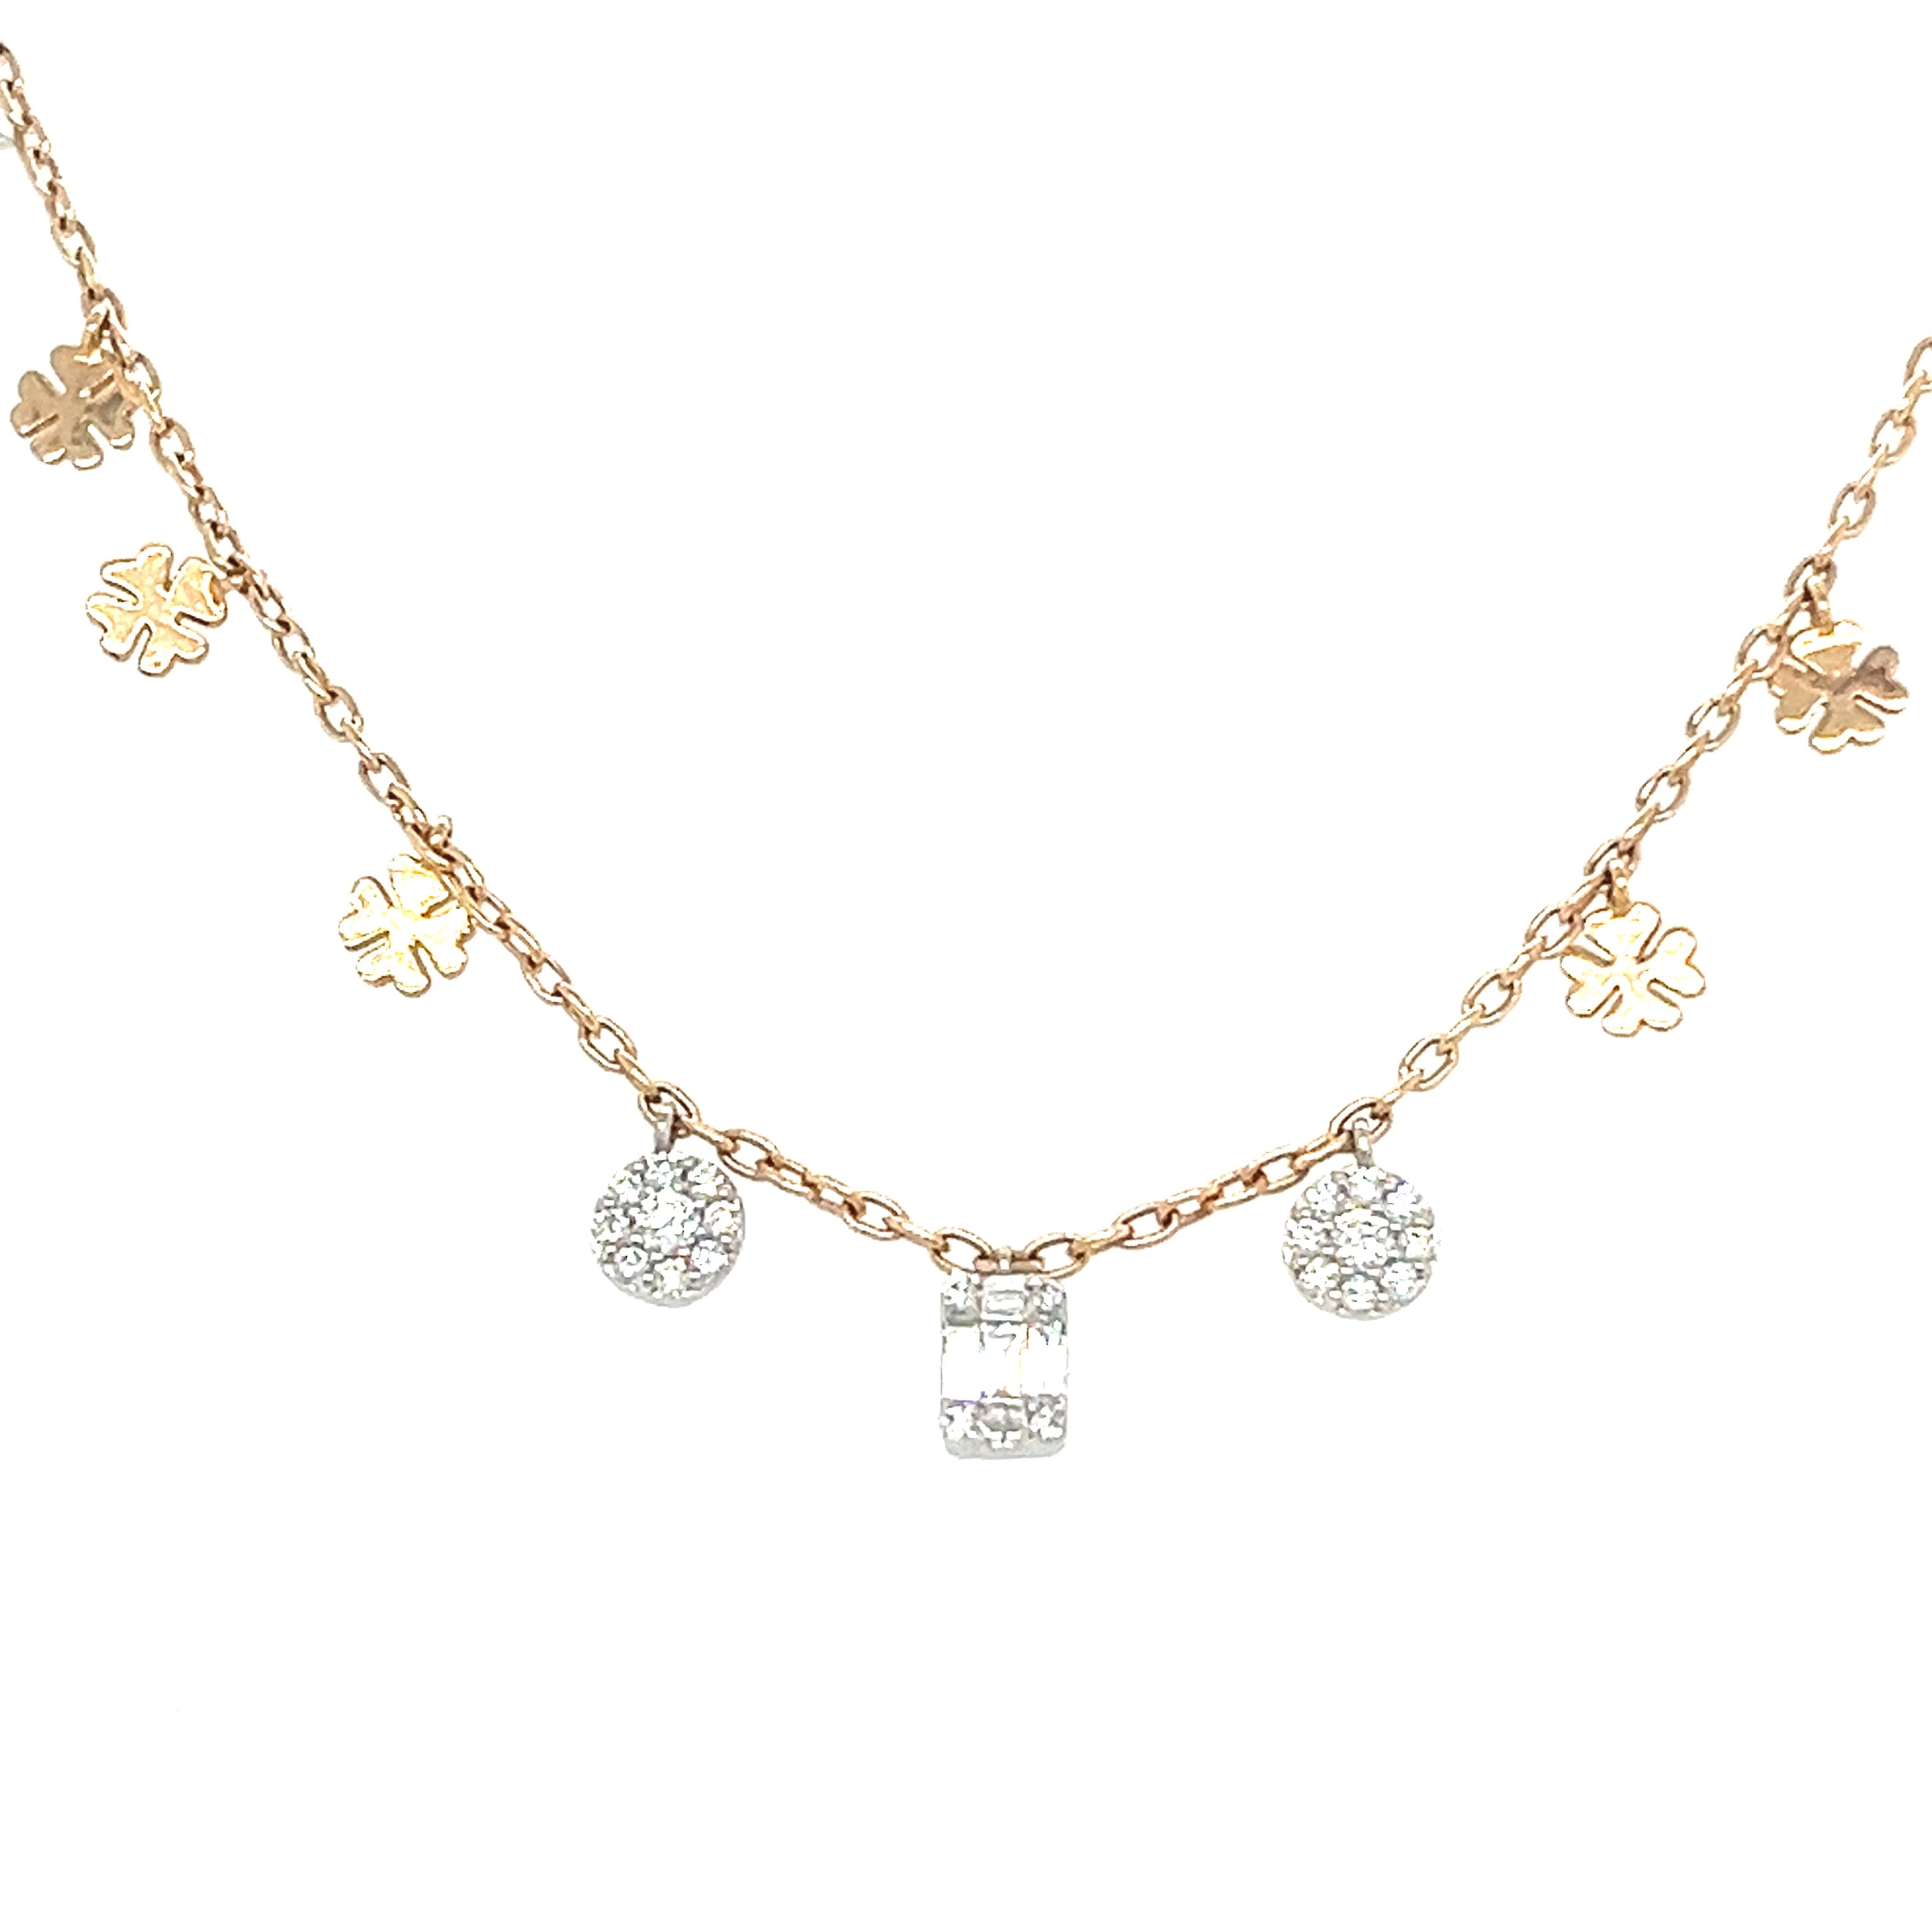 Dangling Stars Necklace in 18K Rose Gold - 4660214B